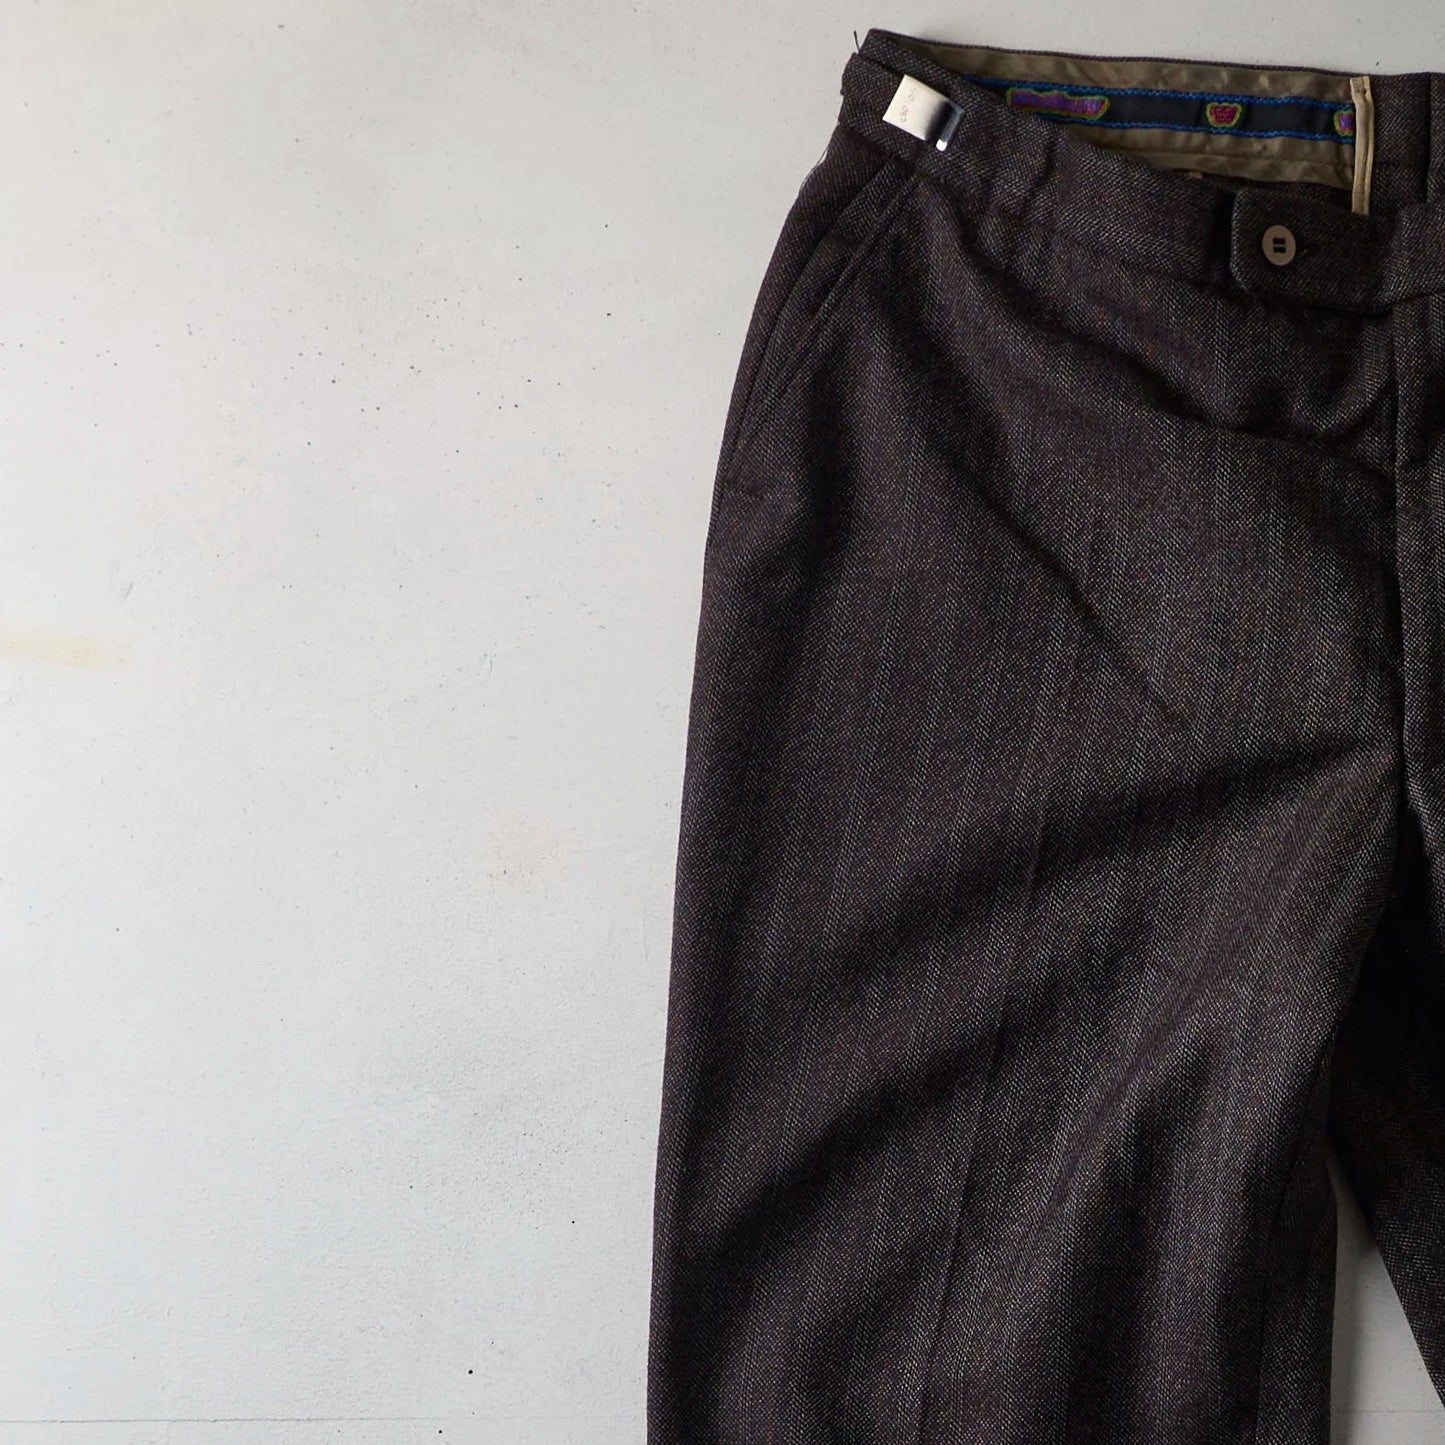 Vintage Charcoal Striped Wool Trousers